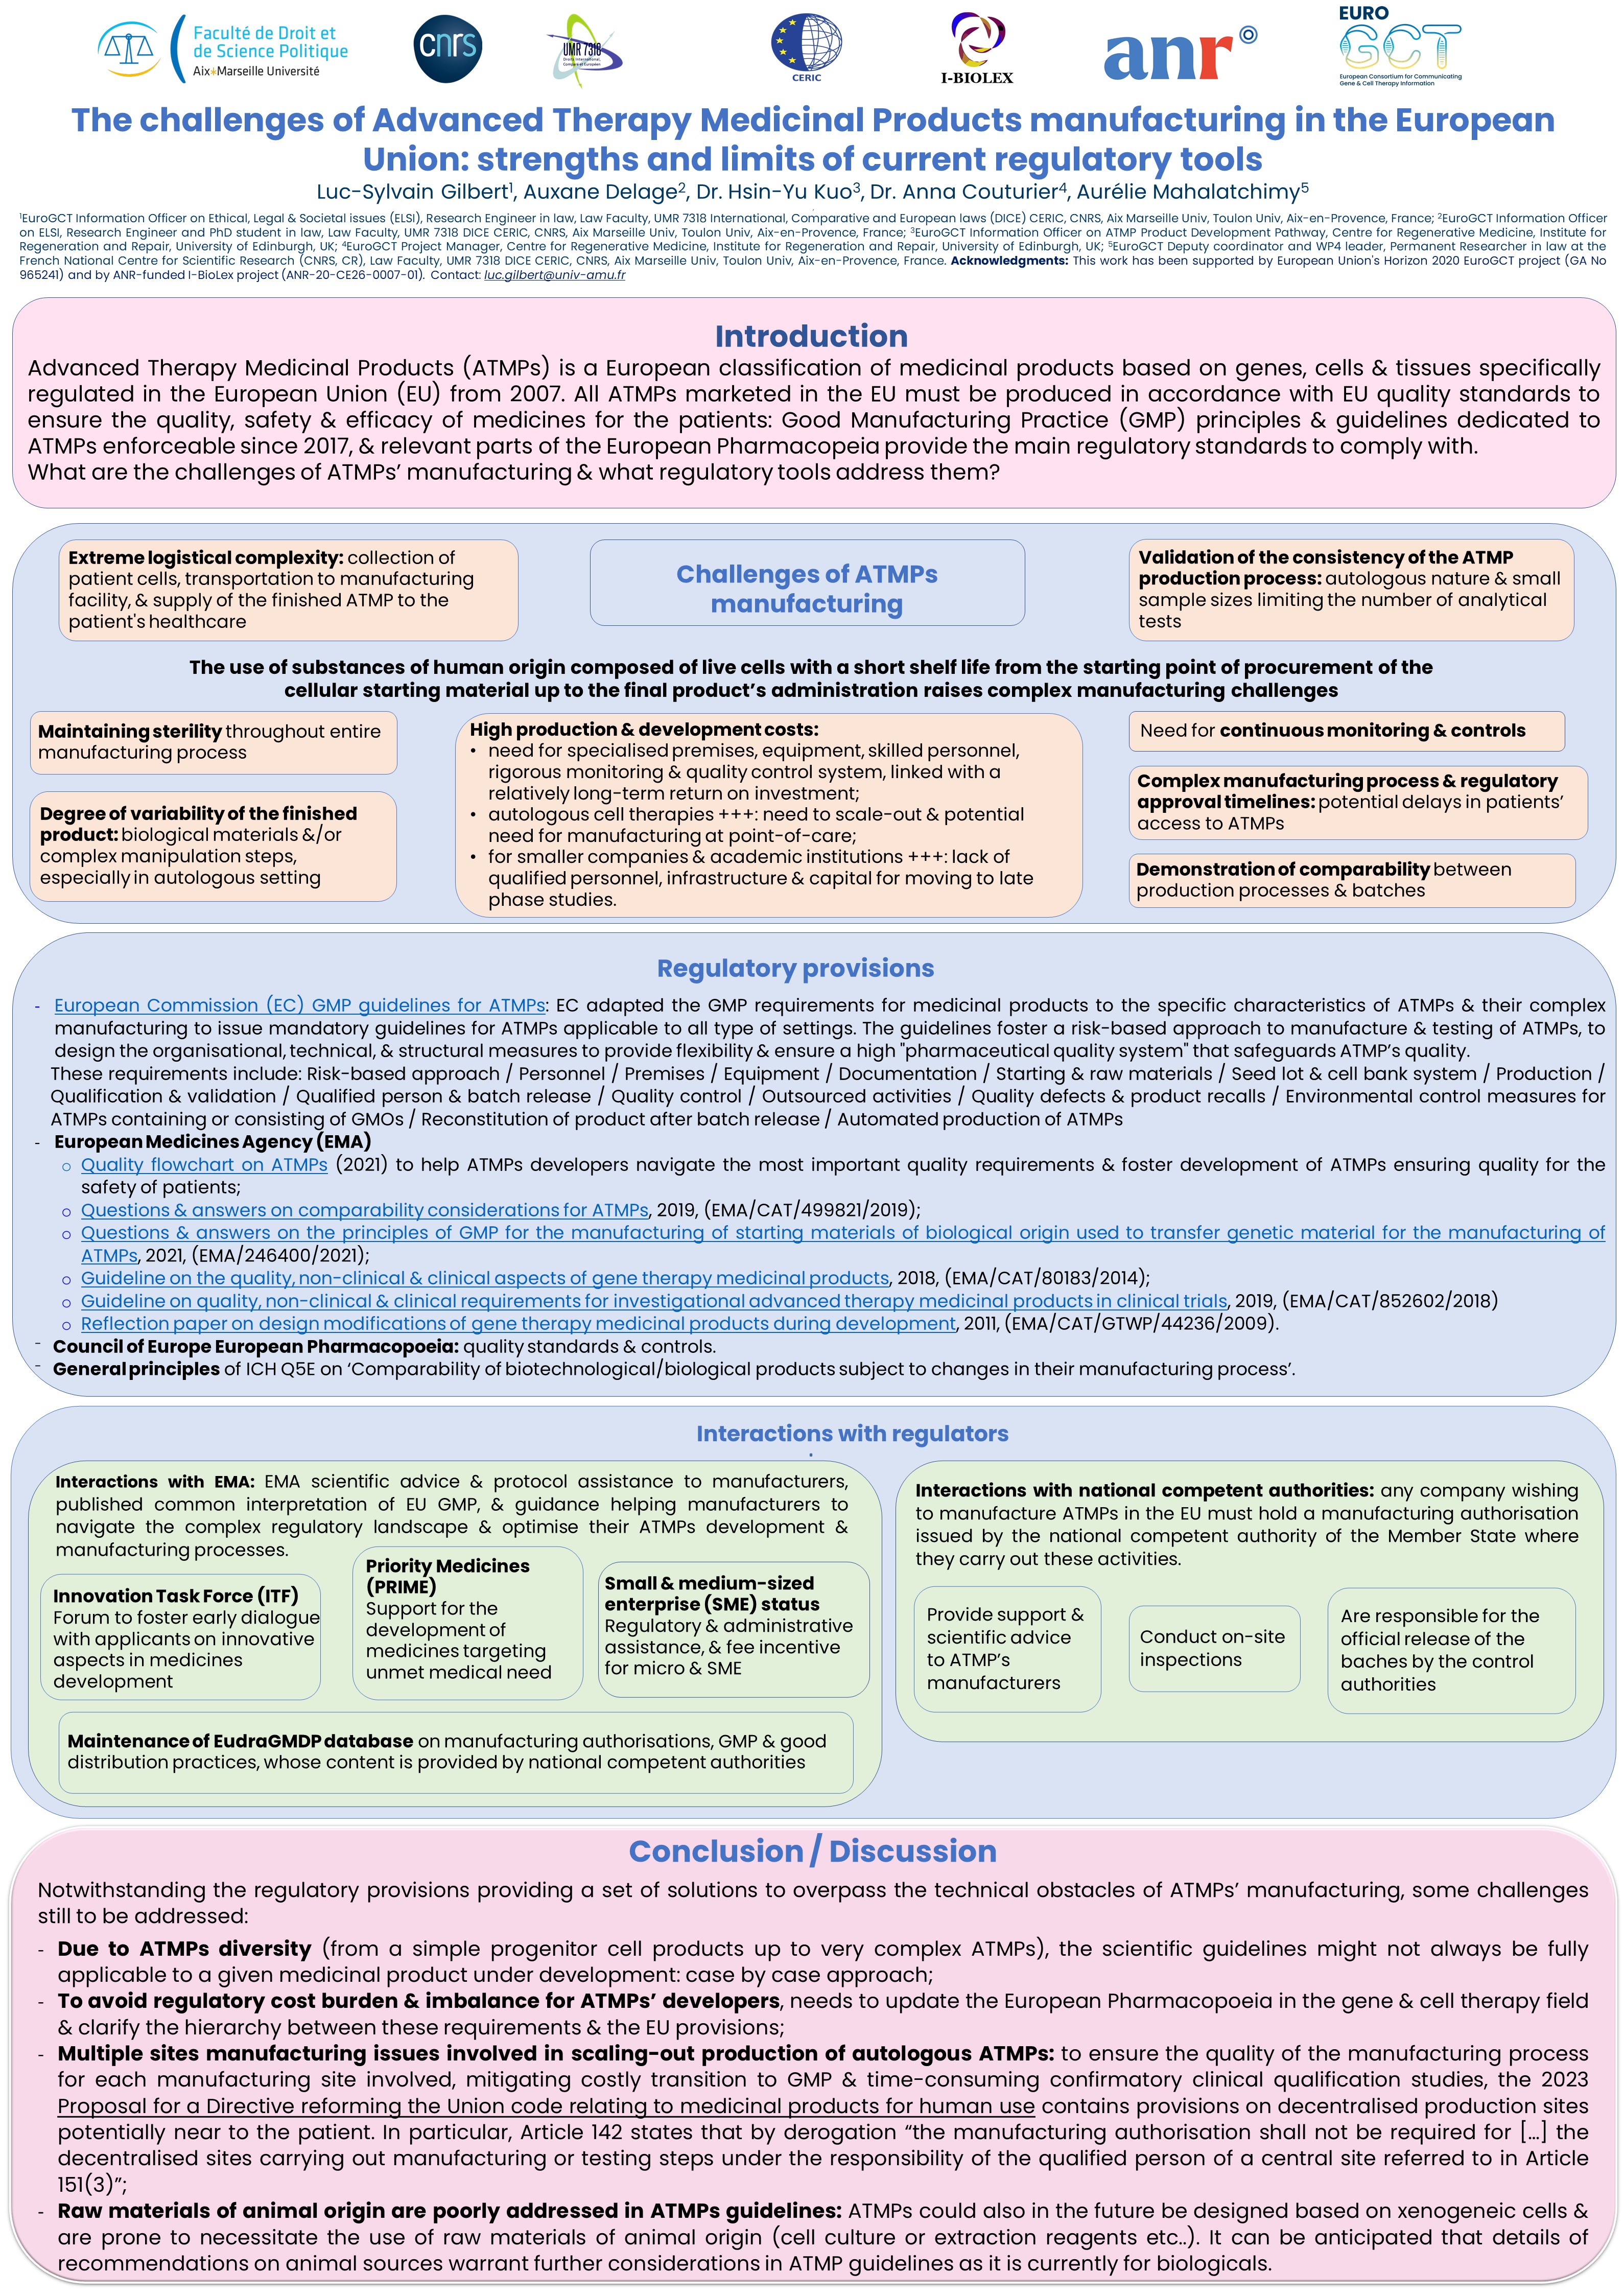 poster: The challenges of Advanced Therapy Medicinal Products manufacturing in the European Union: Strengths and limits of current regulatory tools